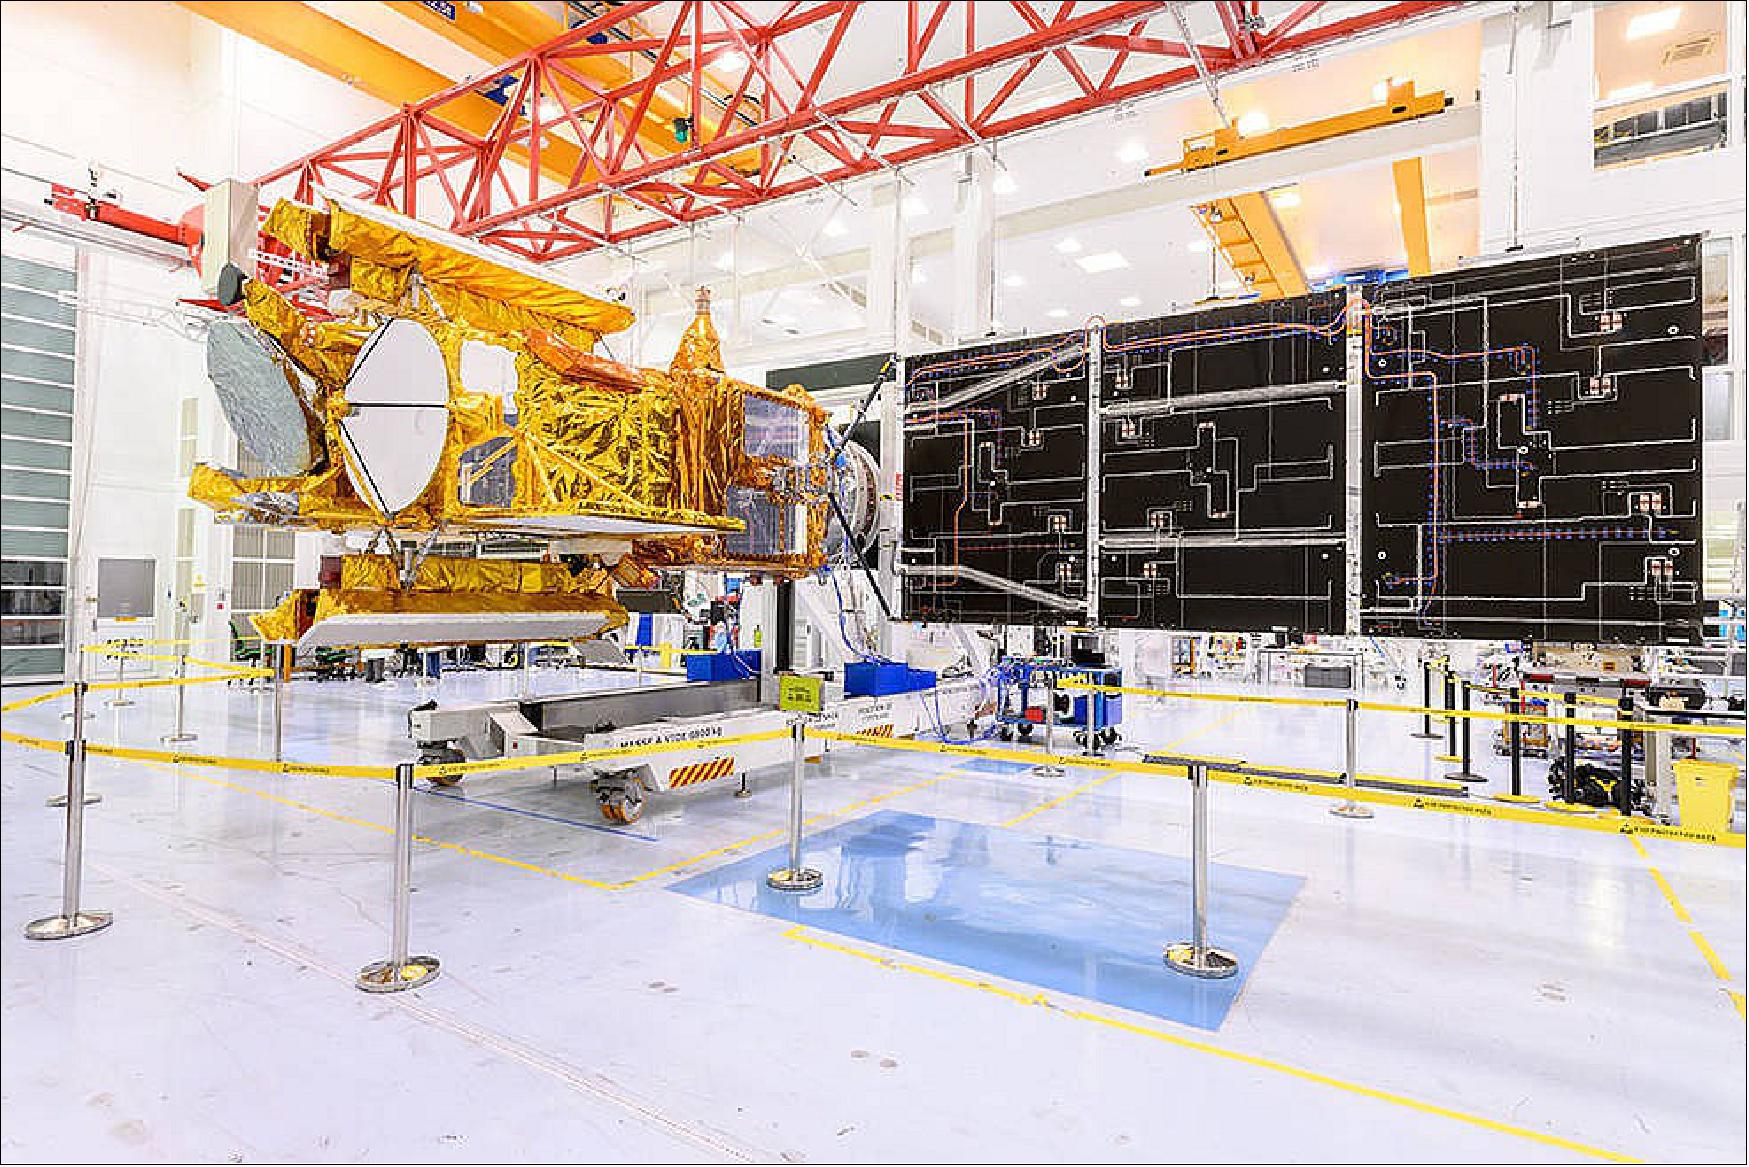 Figure 2: SWOT’s solar panels unfold as part of a test in January at a Thales Alenia Space facility in Cannes, France, where the satellite is being assembled. SWOT will measure elevations of Earth’s ocean and surface water, giving researchers information with an unprecedented level of detail (image credits: CNES/Thales Alenia Space)